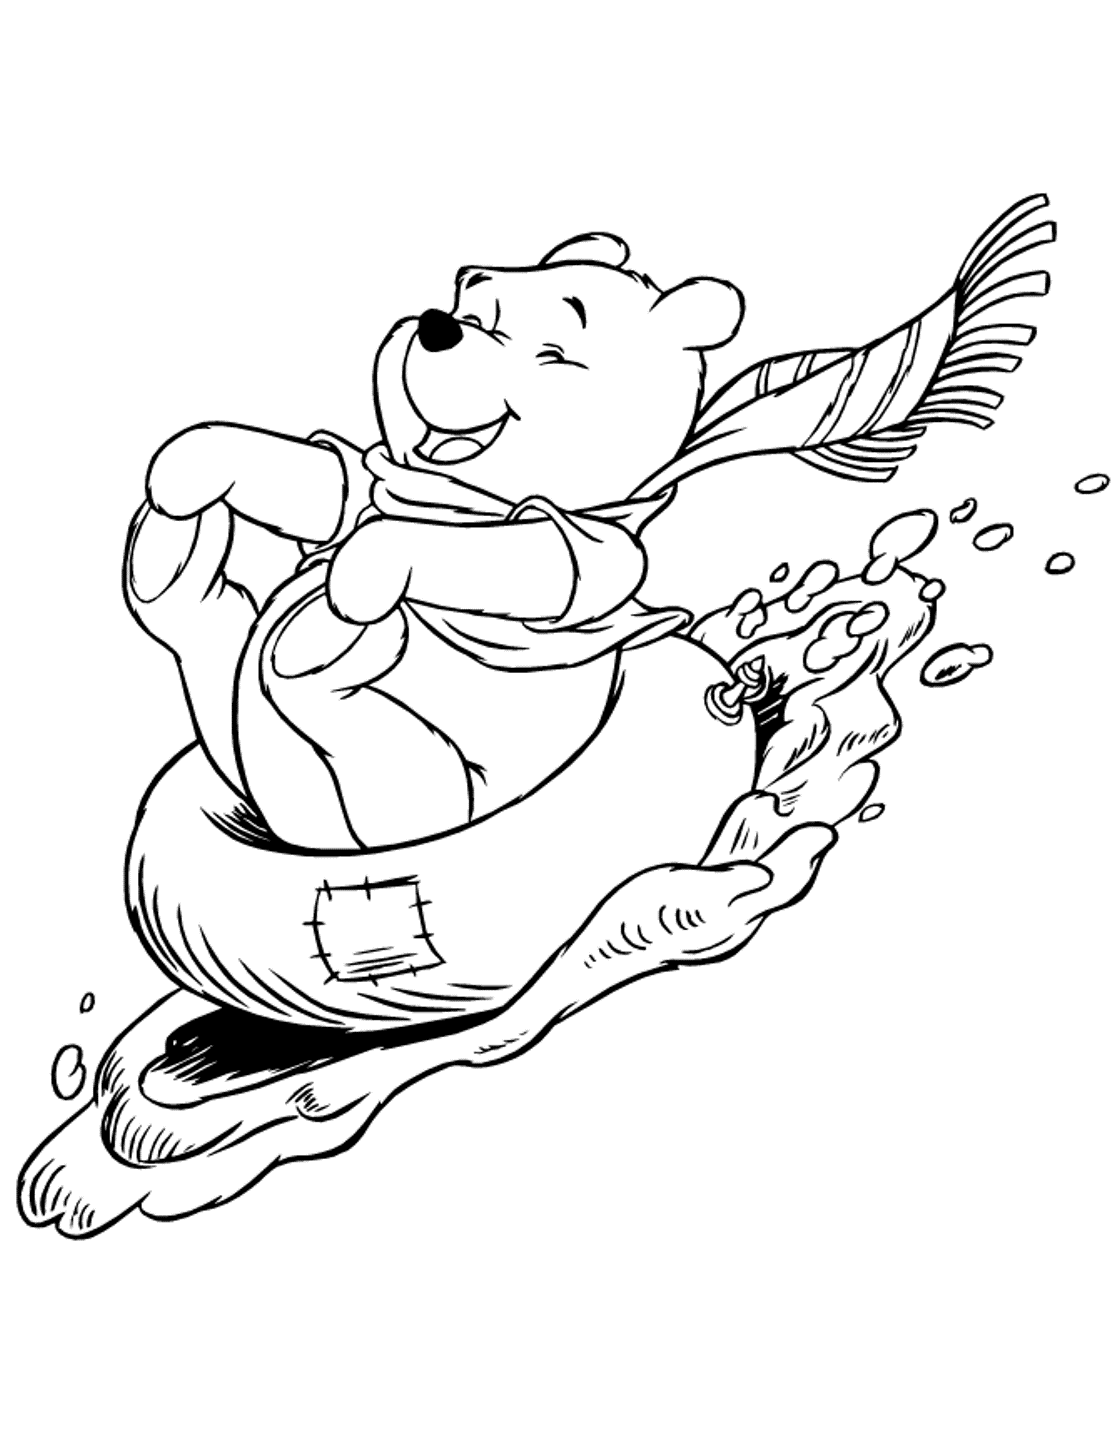 Winnie The Pooh S Sledding In Winterde83 Coloring Page